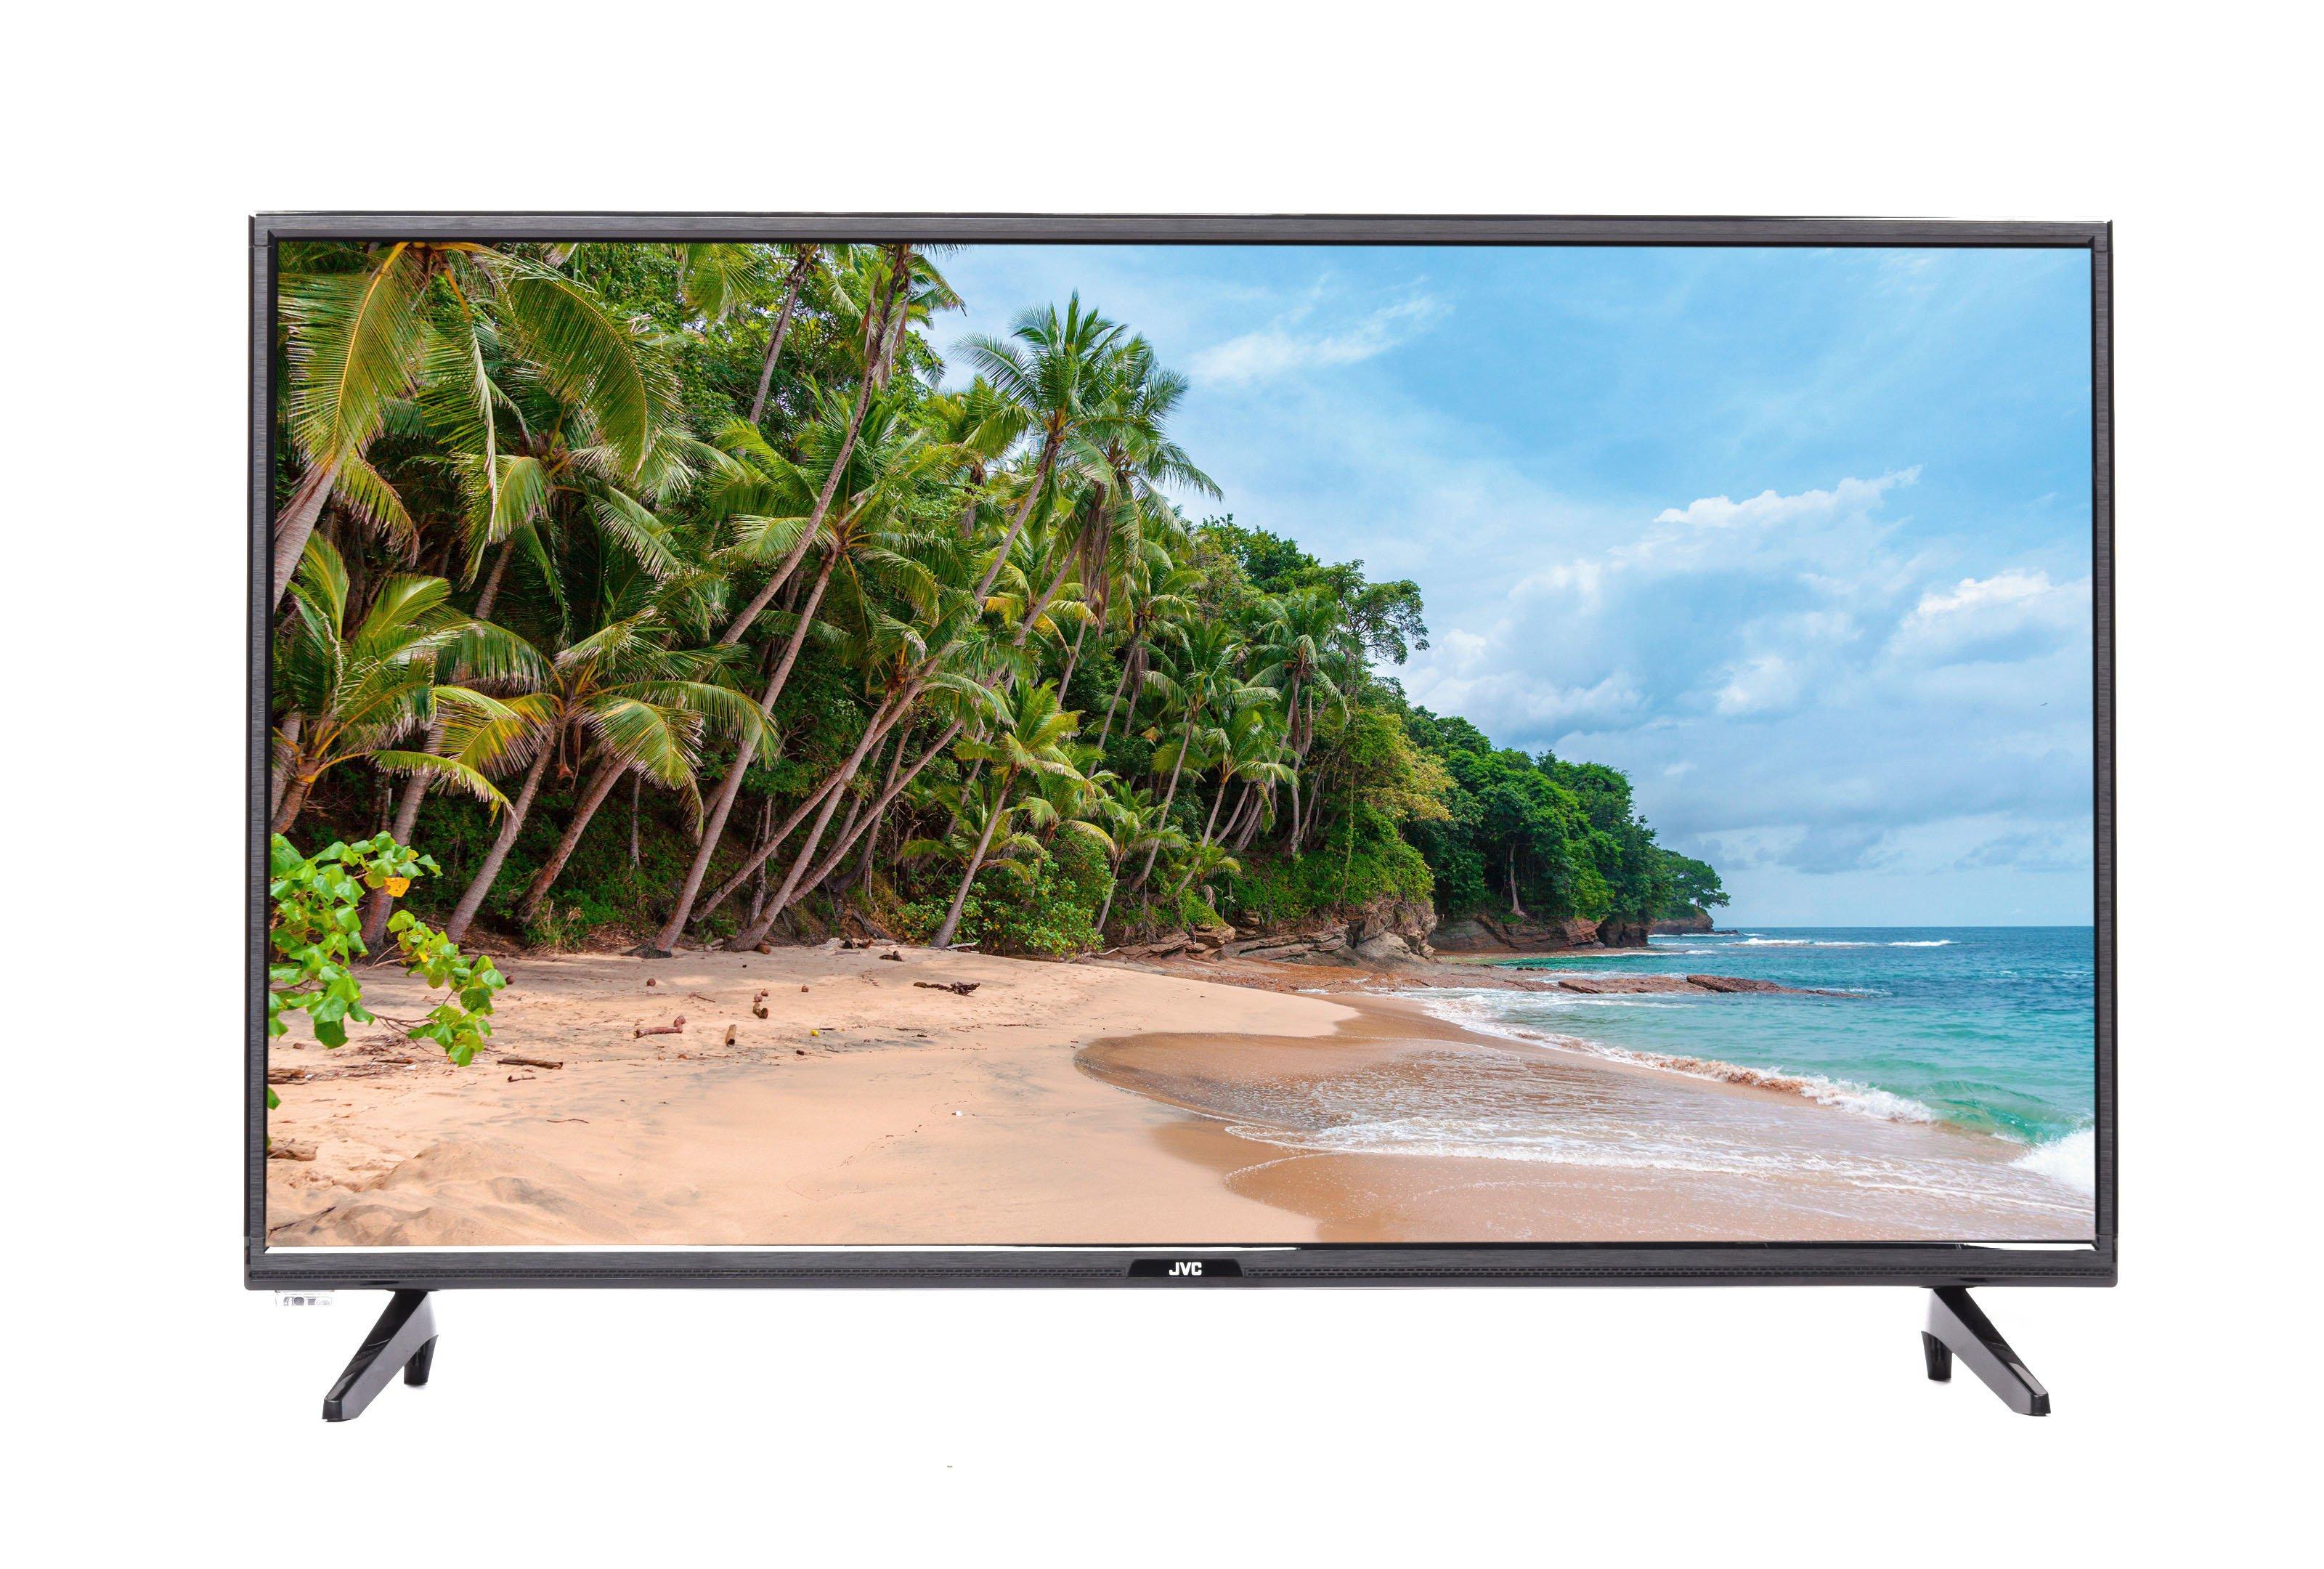 Jvc 40 Inch Fhd Led Tv Price In Saudi Arabia Extra Stores Tvs